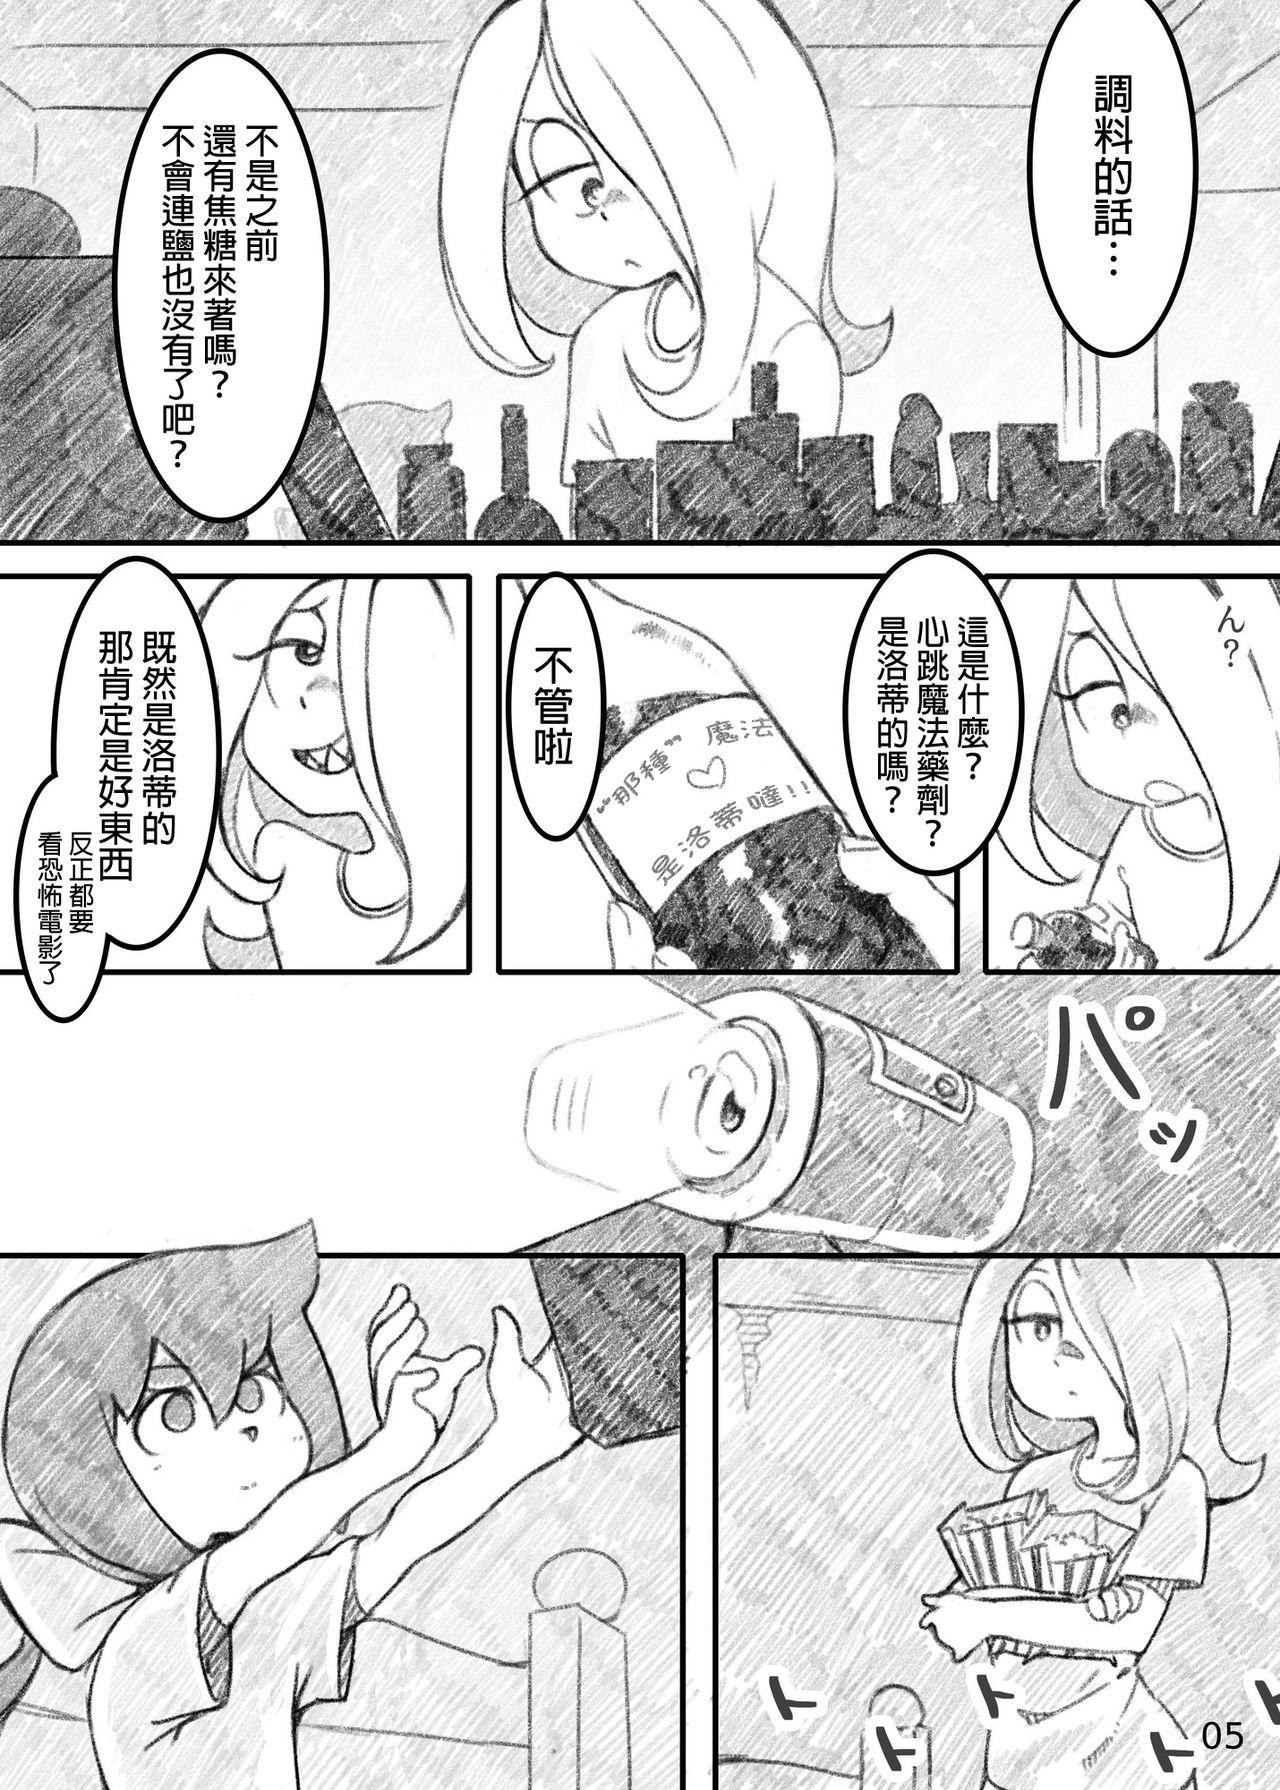 Eating Movie Night - Little witch academia Eat - Page 5